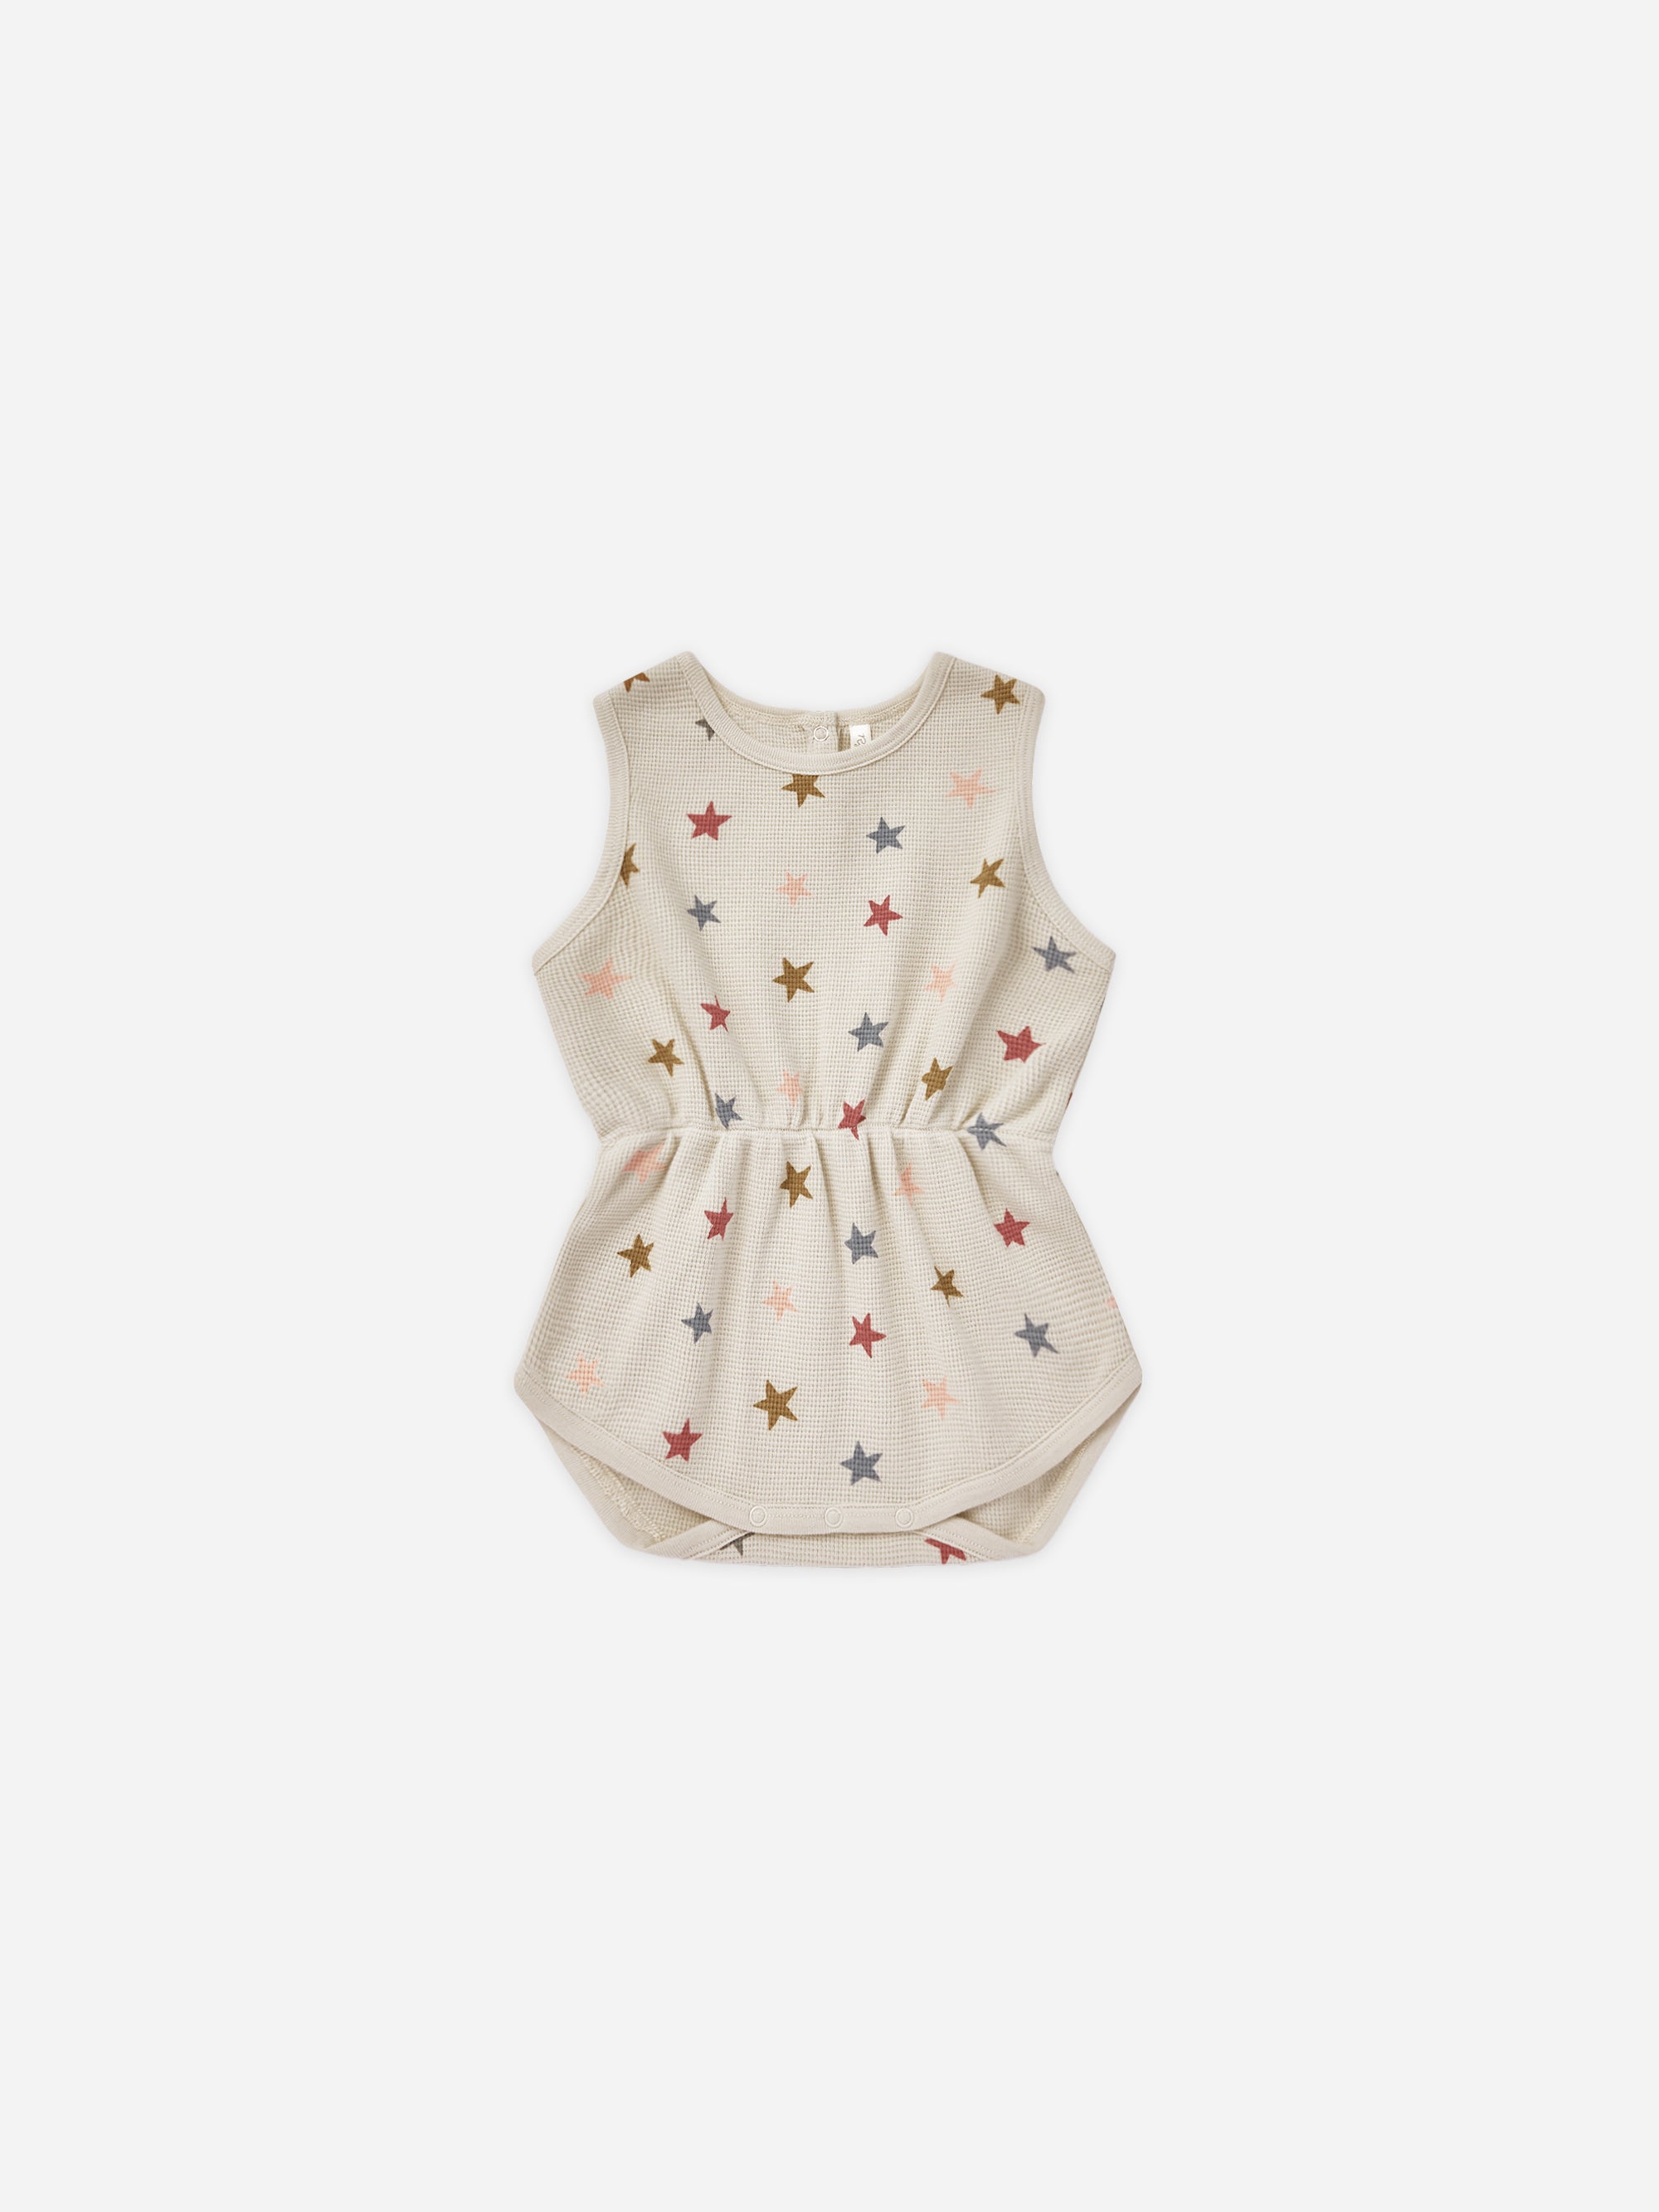 Cinch Playsuit || Stars - Rylee + Cru | Kids Clothes | Trendy Baby Clothes | Modern Infant Outfits |